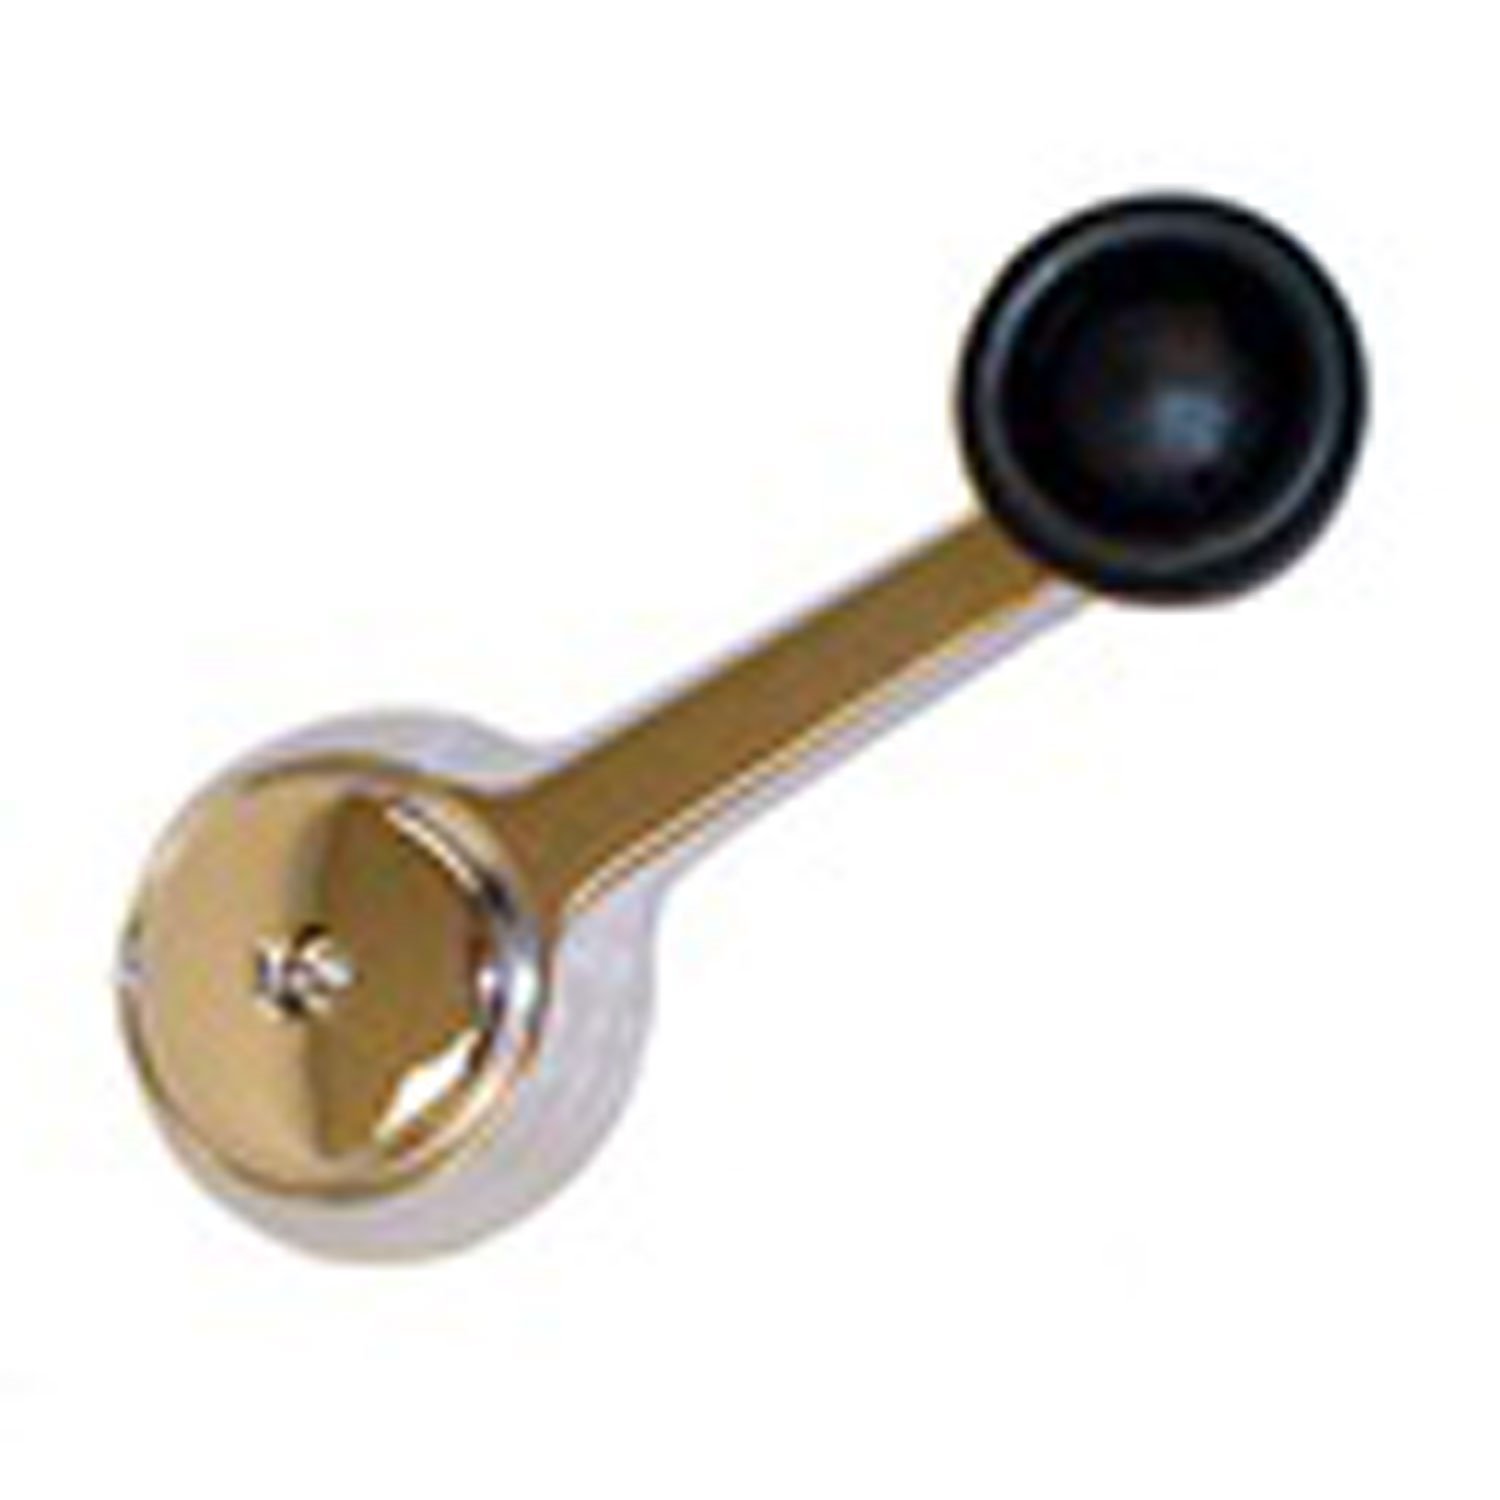 This chrome window crank handle and screw fits left or right hard doors. Fits 76-86 CJ7 81-86 CJ8 an